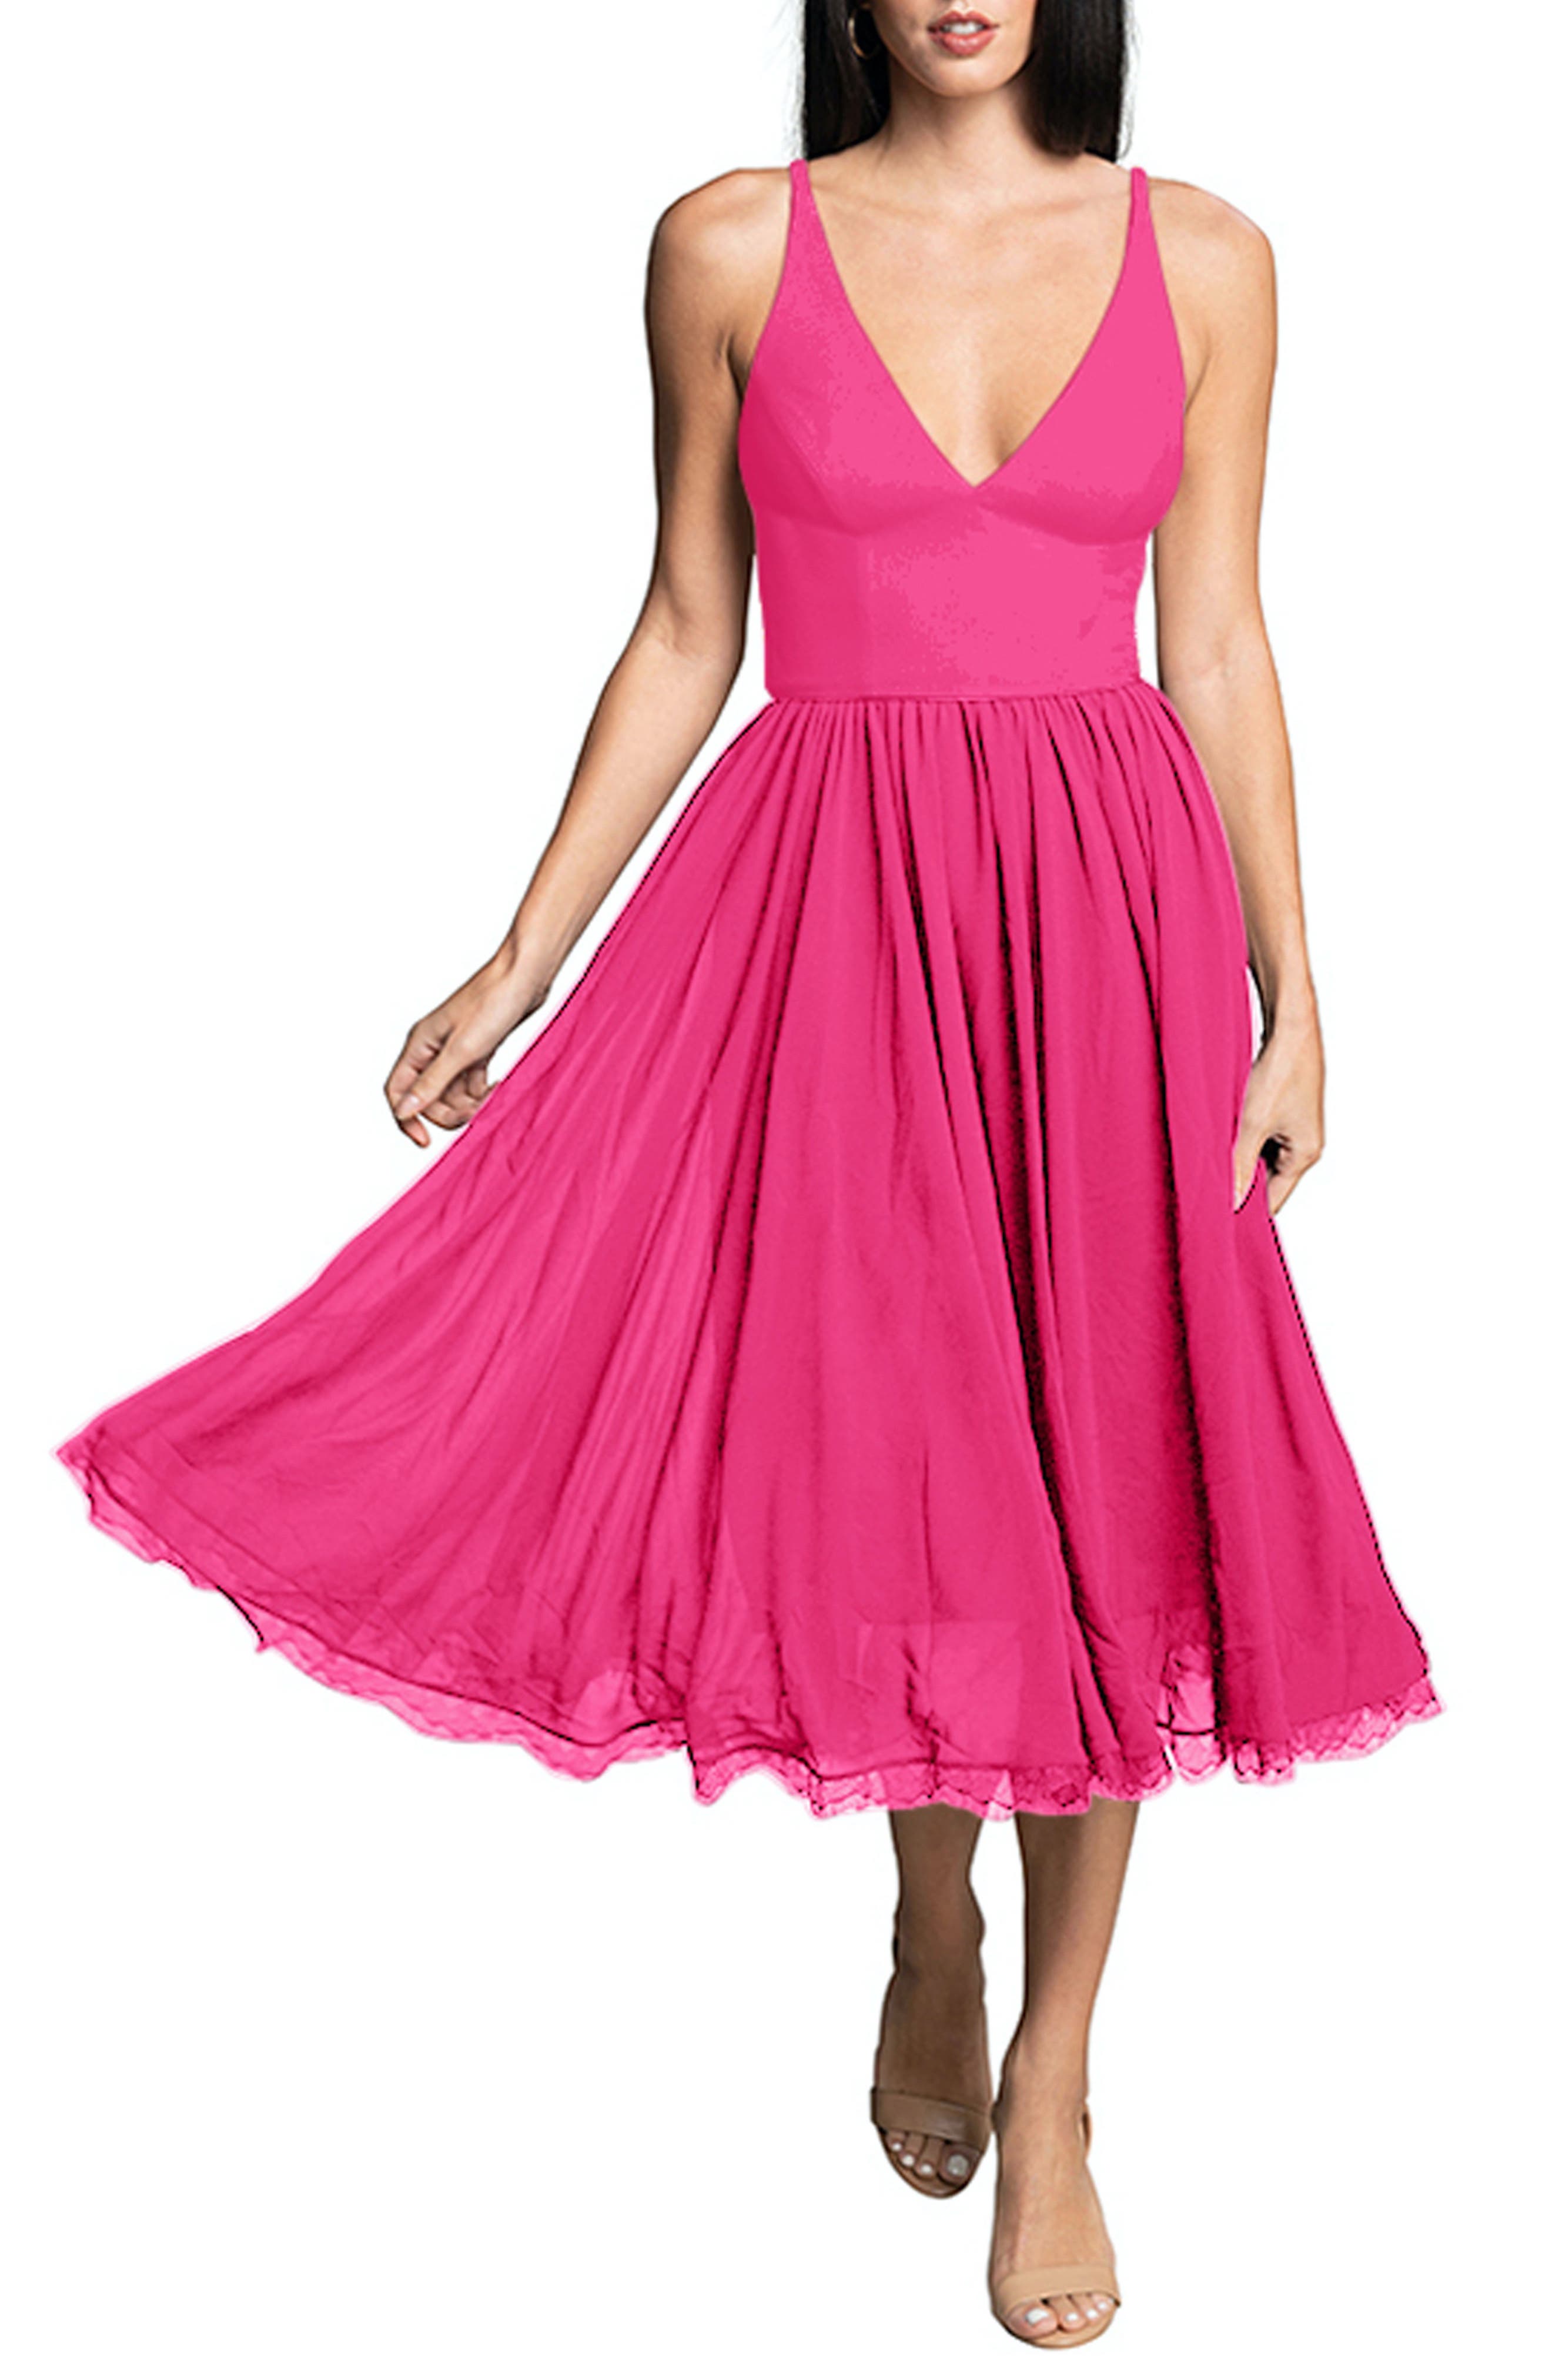 Pink Homecoming Dresses for Women ...